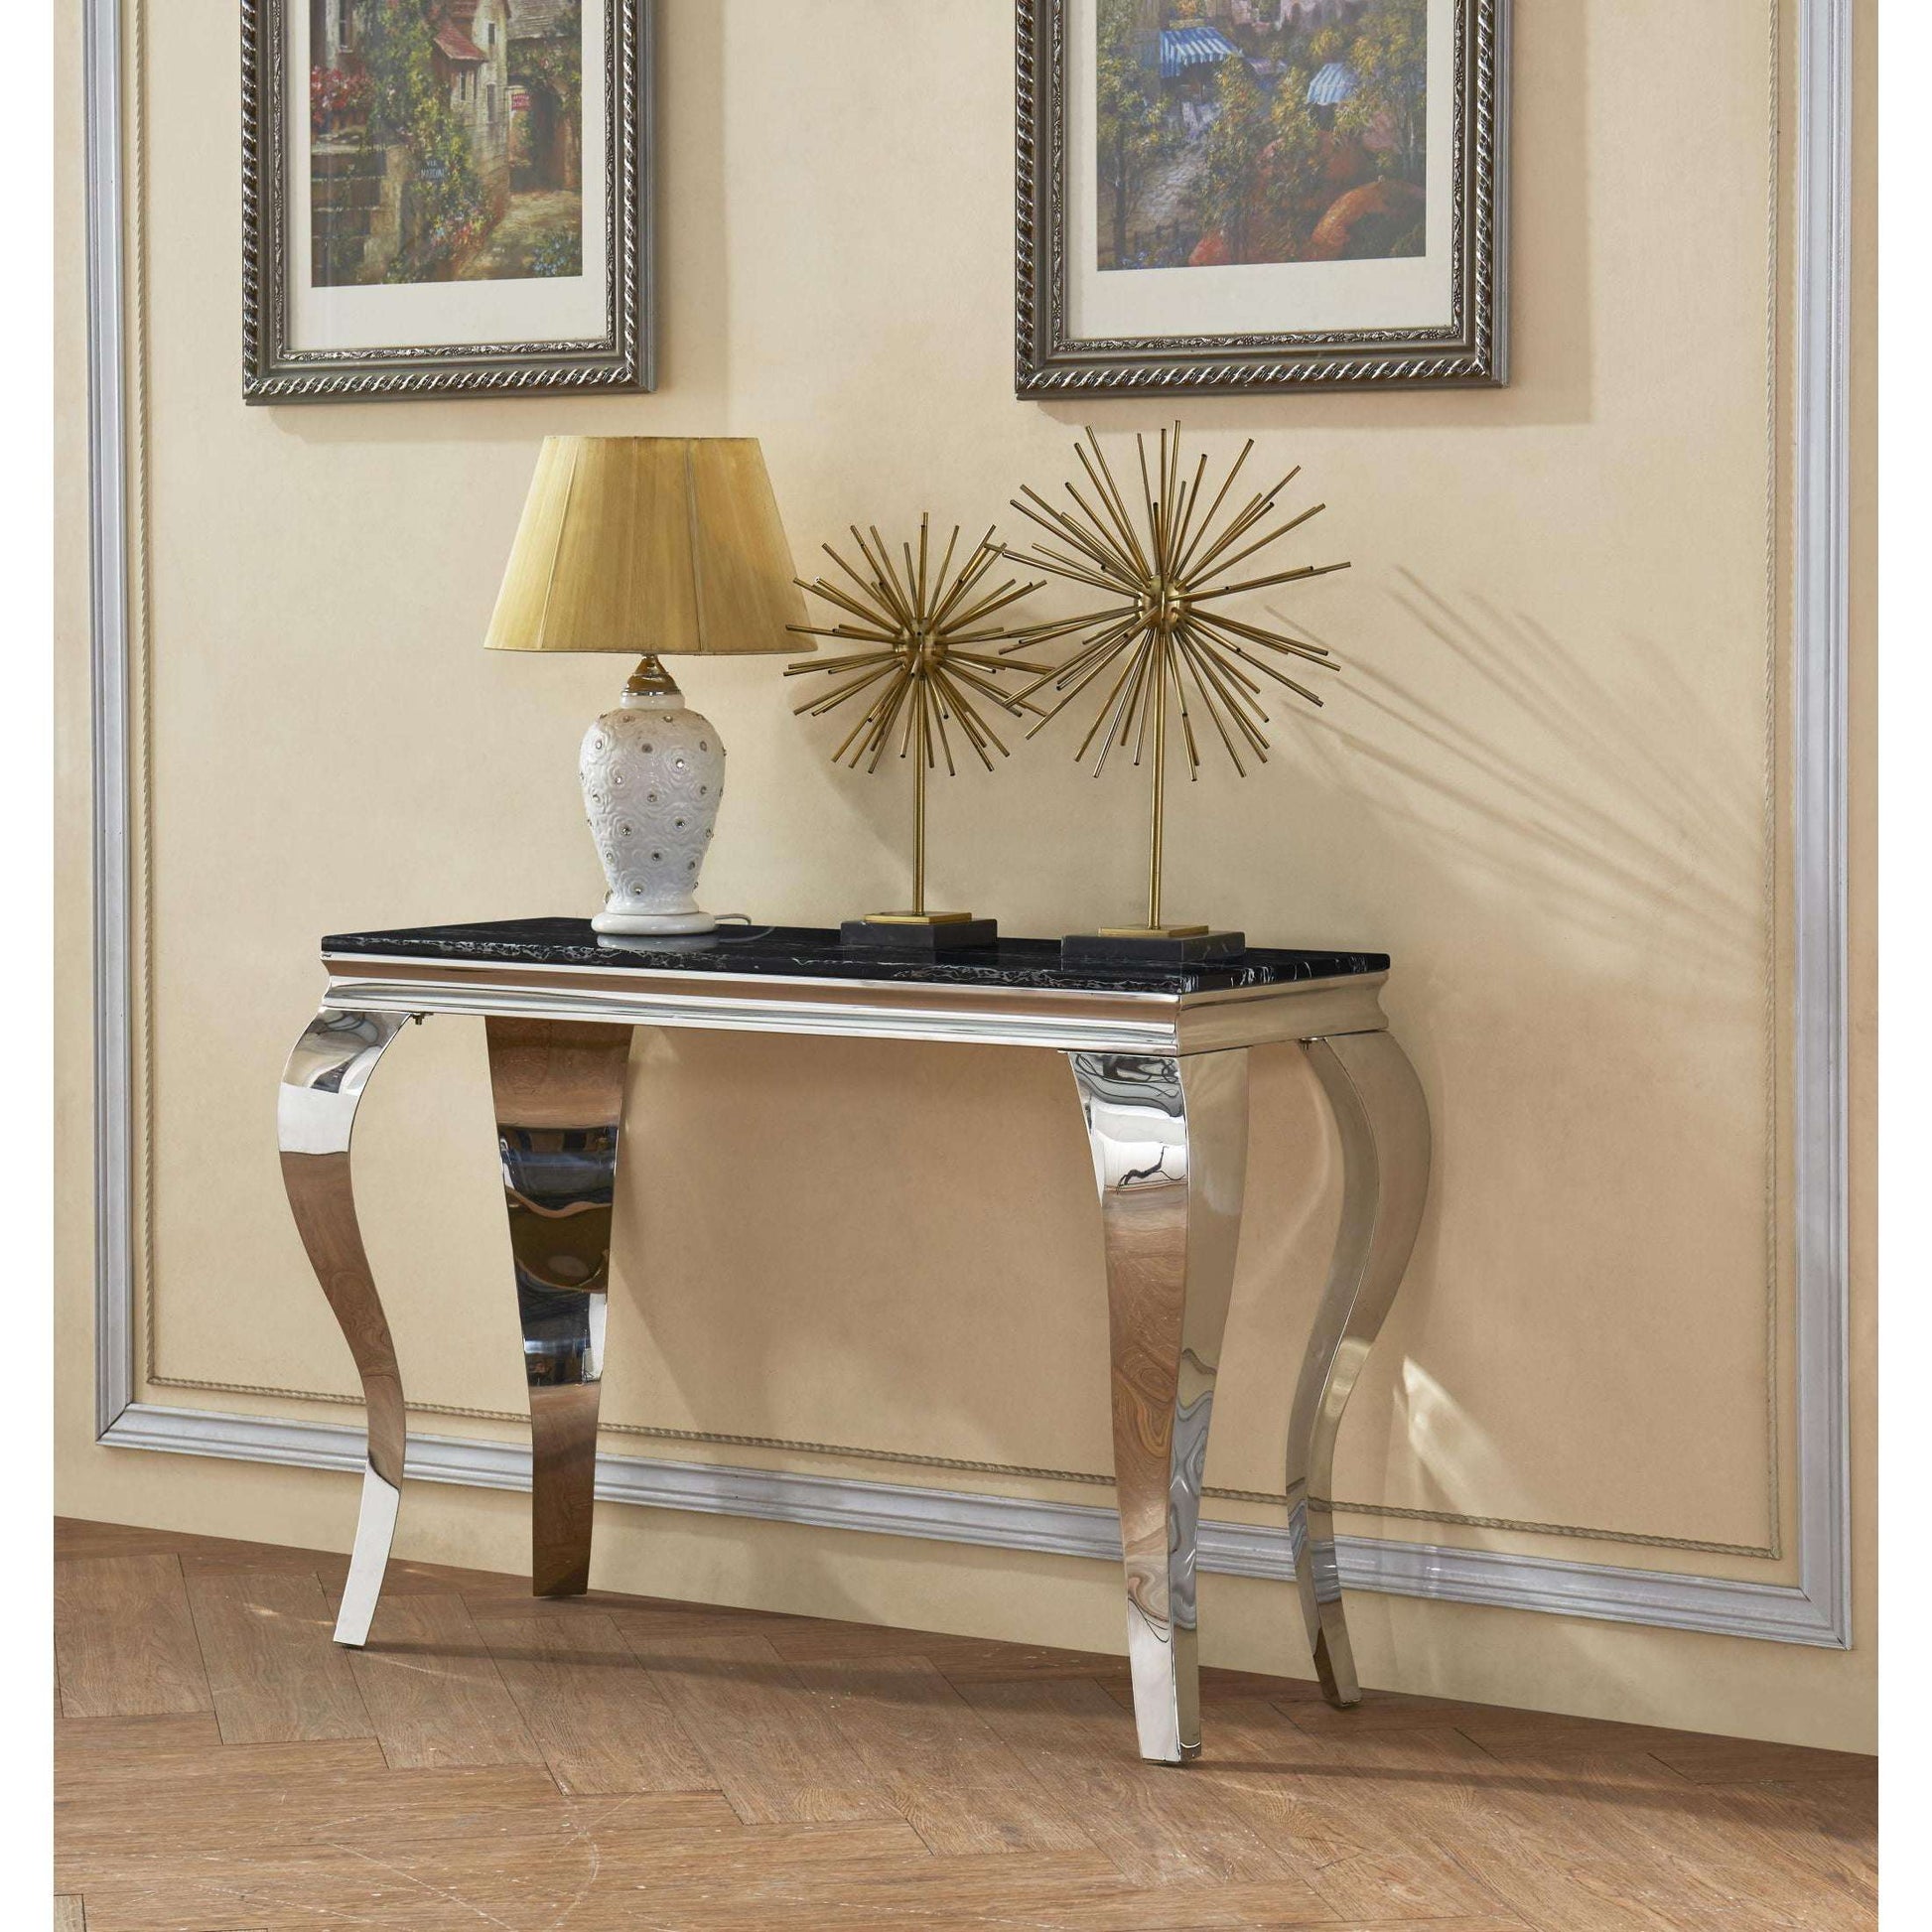 Ashpinoke:Arriana Marble Console Table with Stainless Steel Base-Console and Hall Tables-Heartlands Furniture